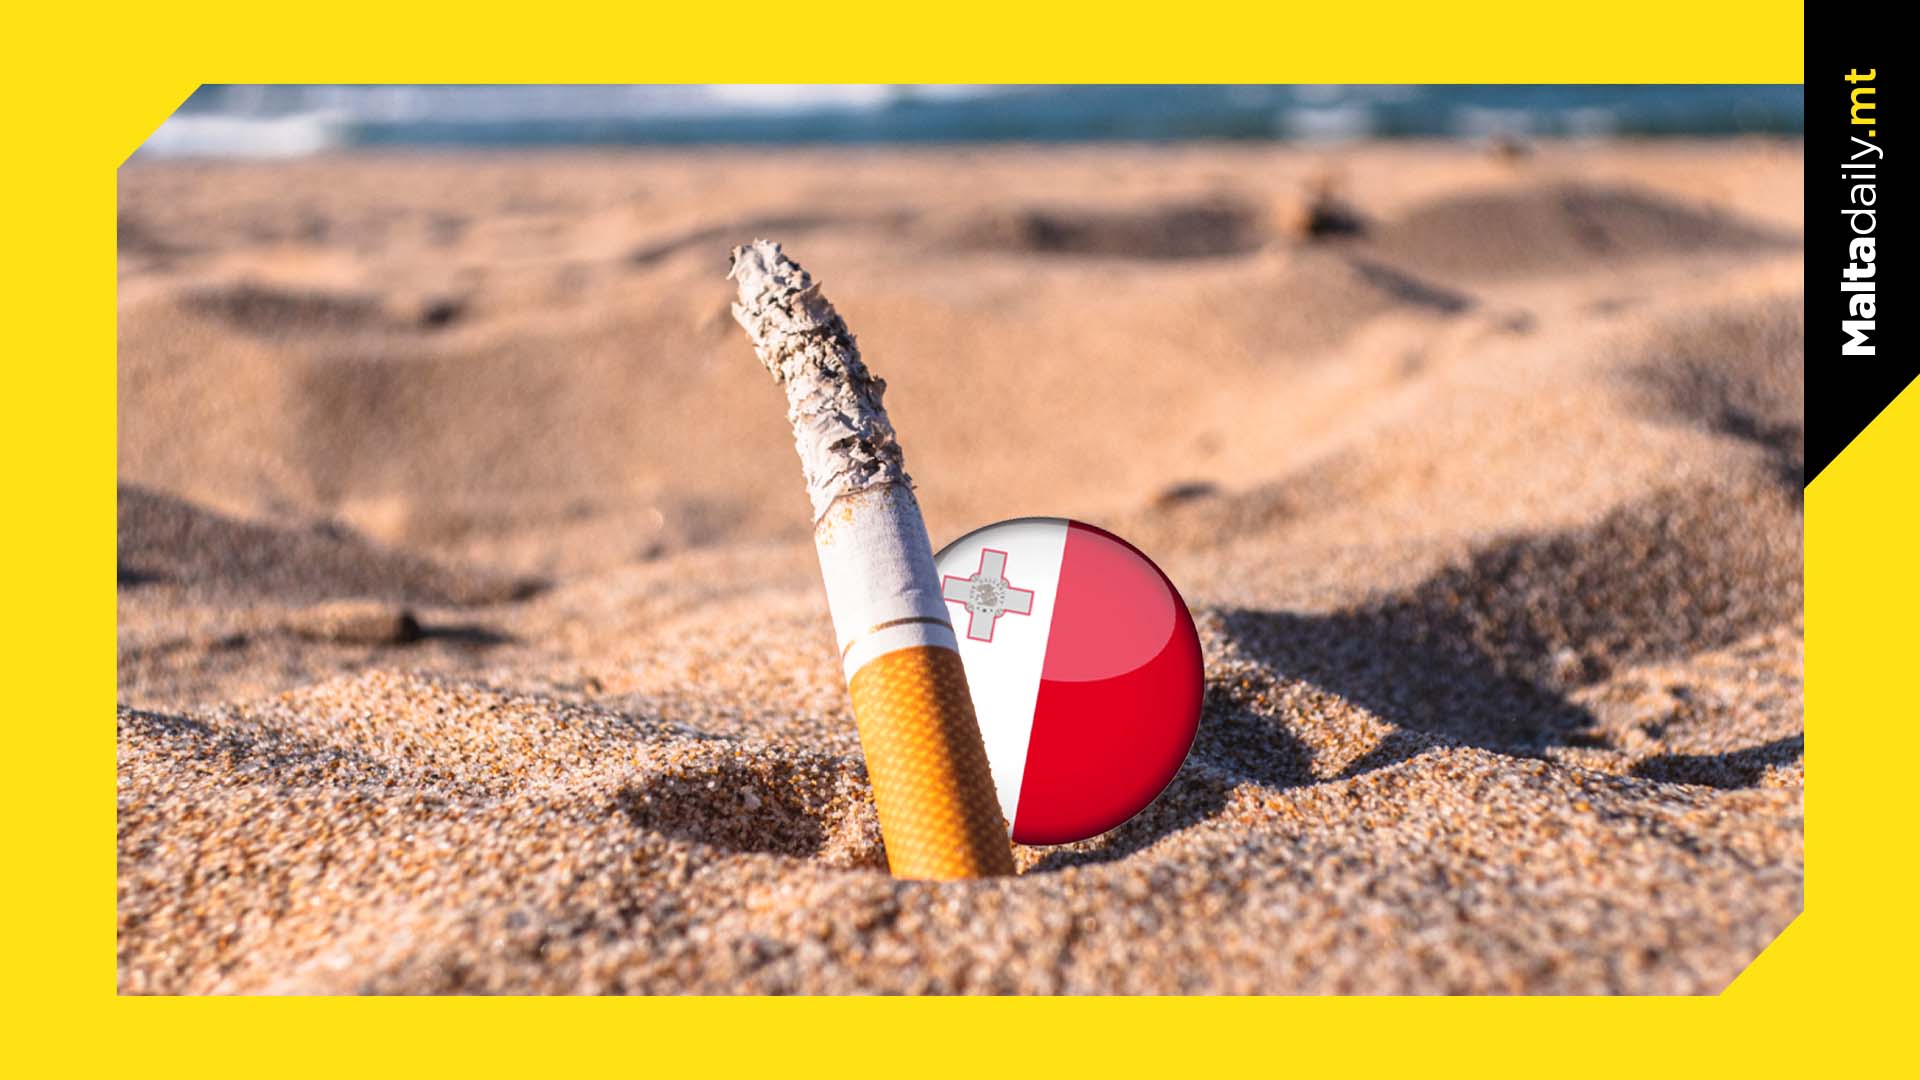 Cigarettes most noted litter item on Maltese beaches